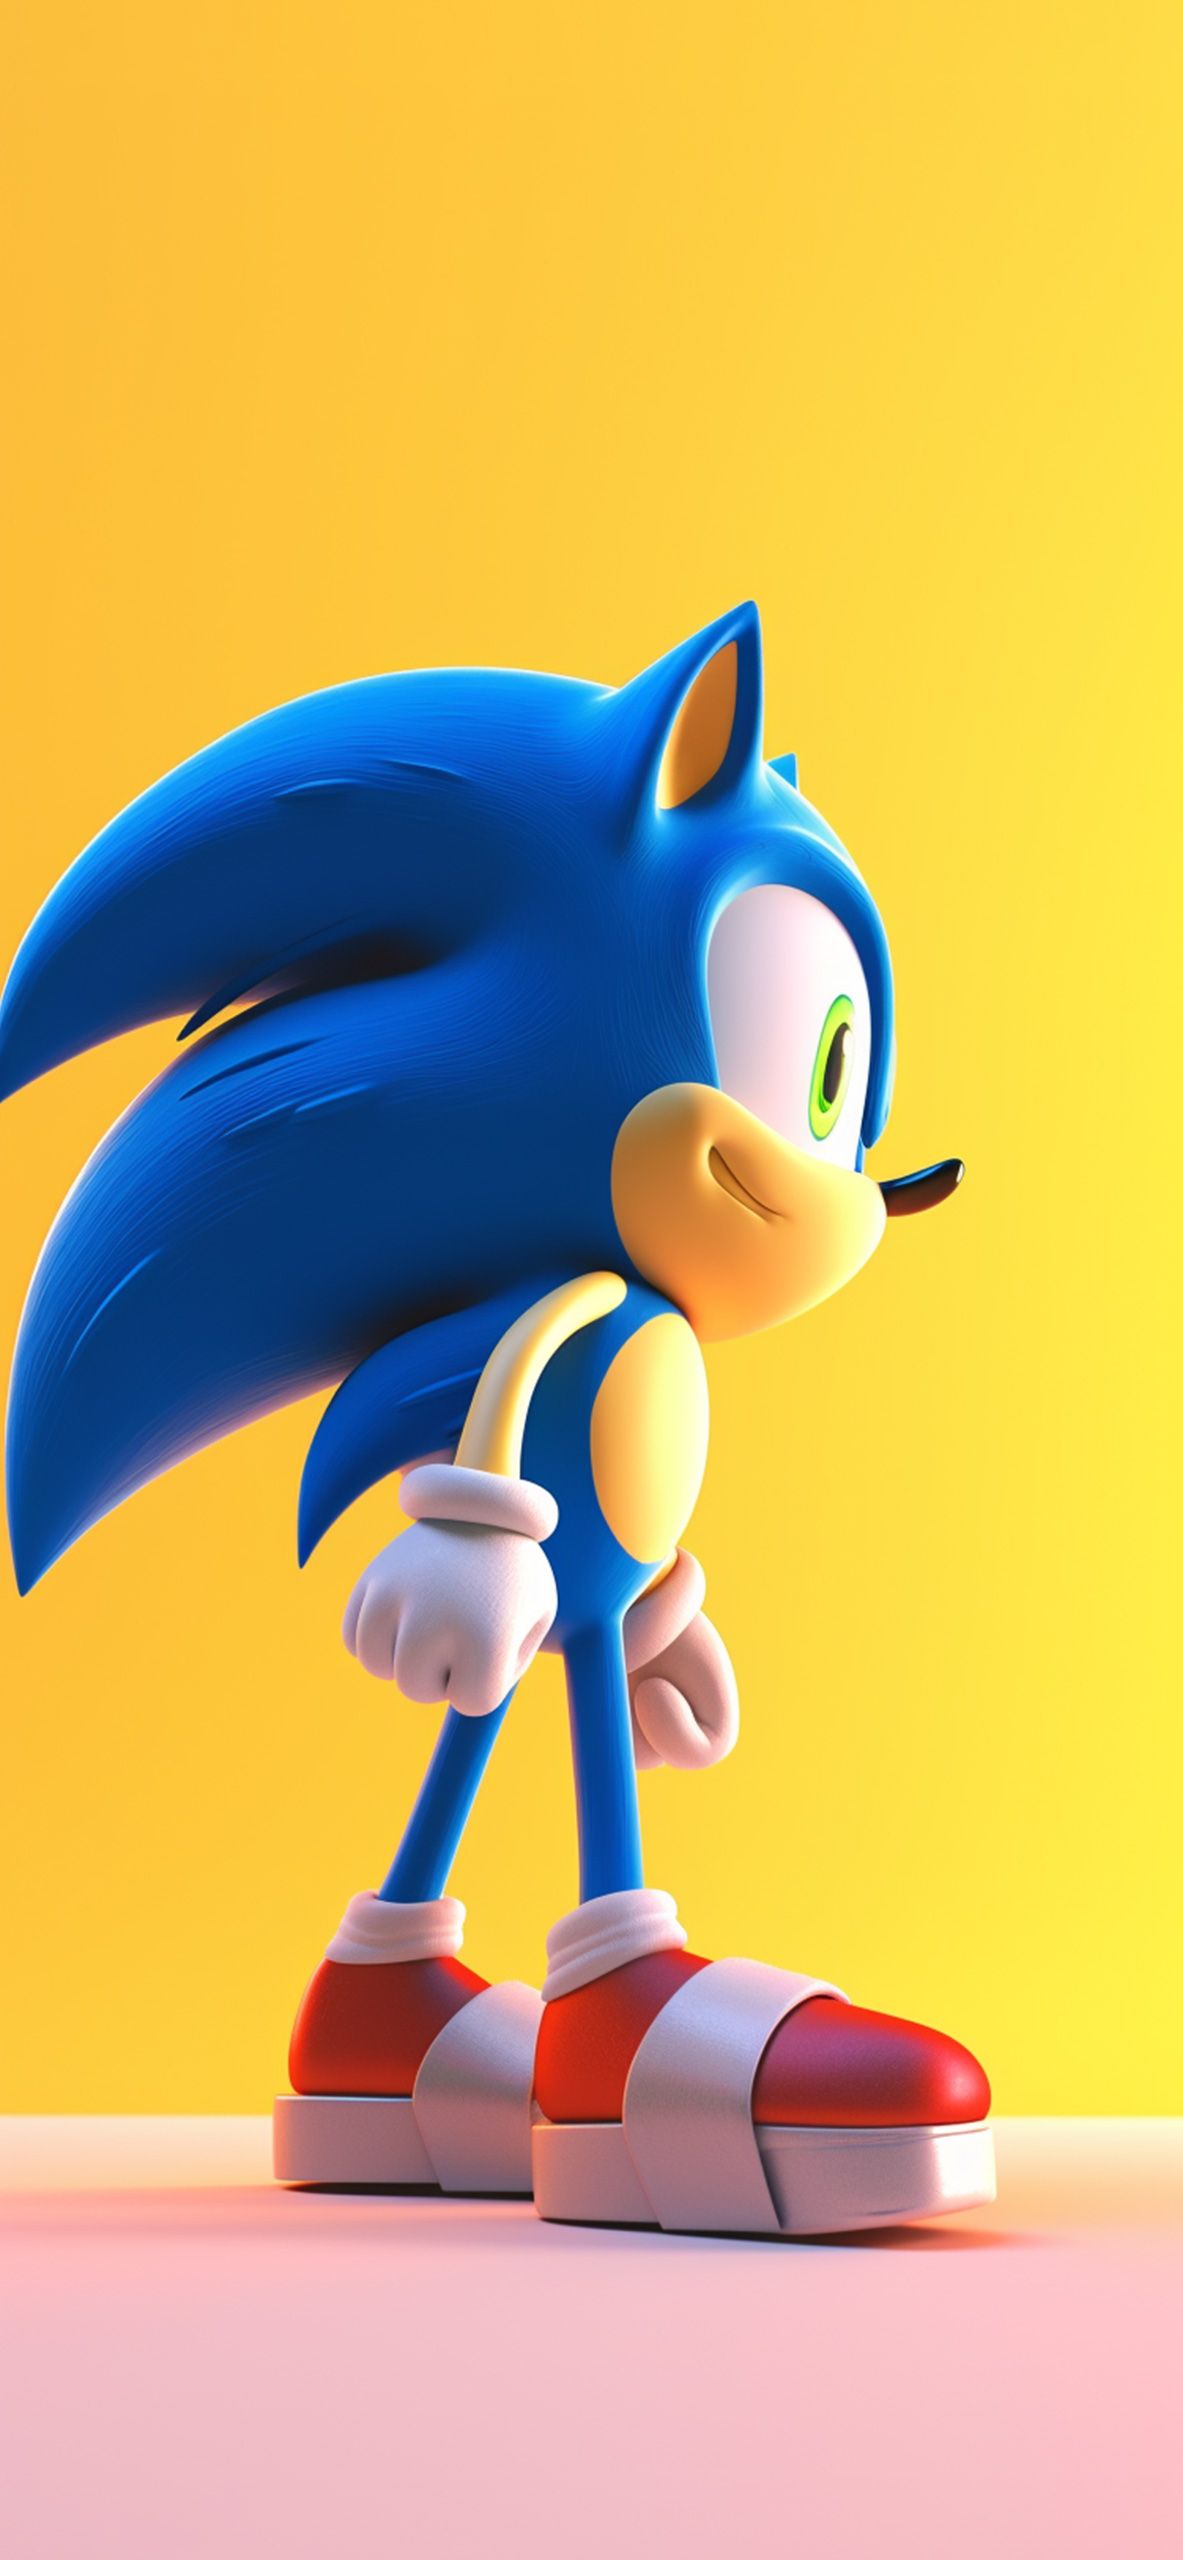 A wallpaper of Sonic the Hedgehog standing on a pink floor with a yellow background - Sonic